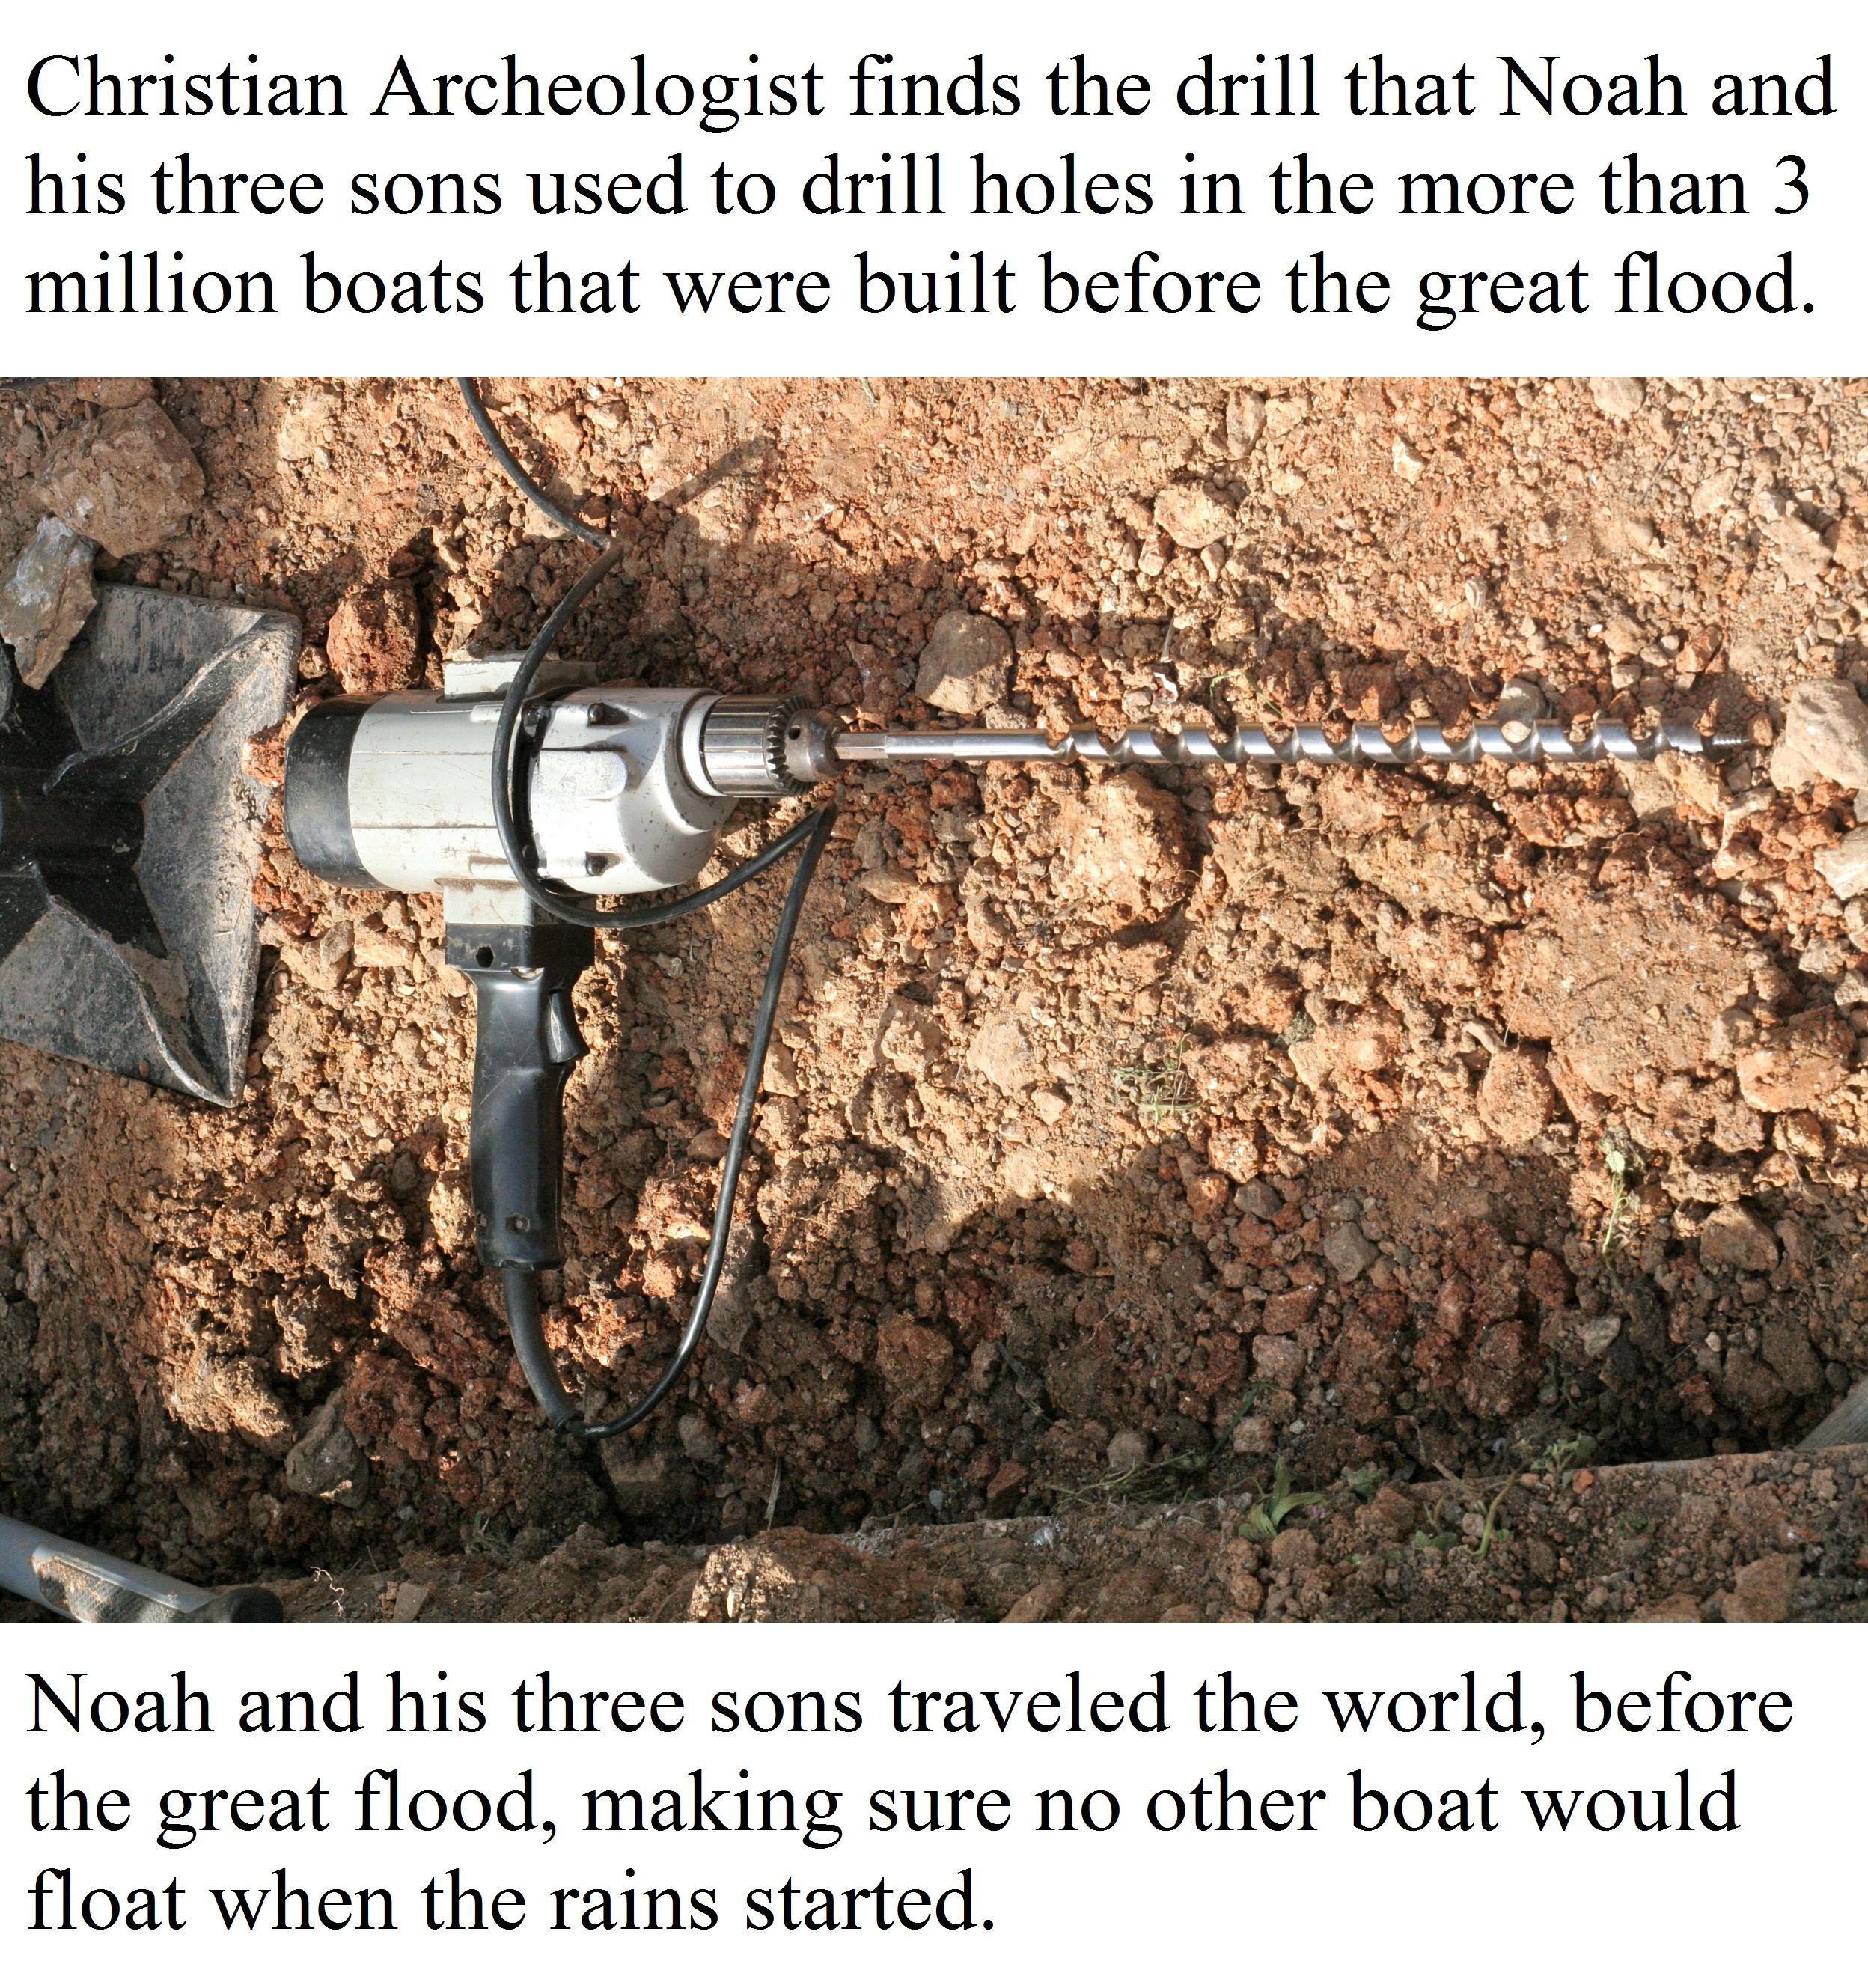 Christian Archeologist finds the drill that Noah and his three sons used to drill holes in the more than 3 million boats that were built before the great flood.